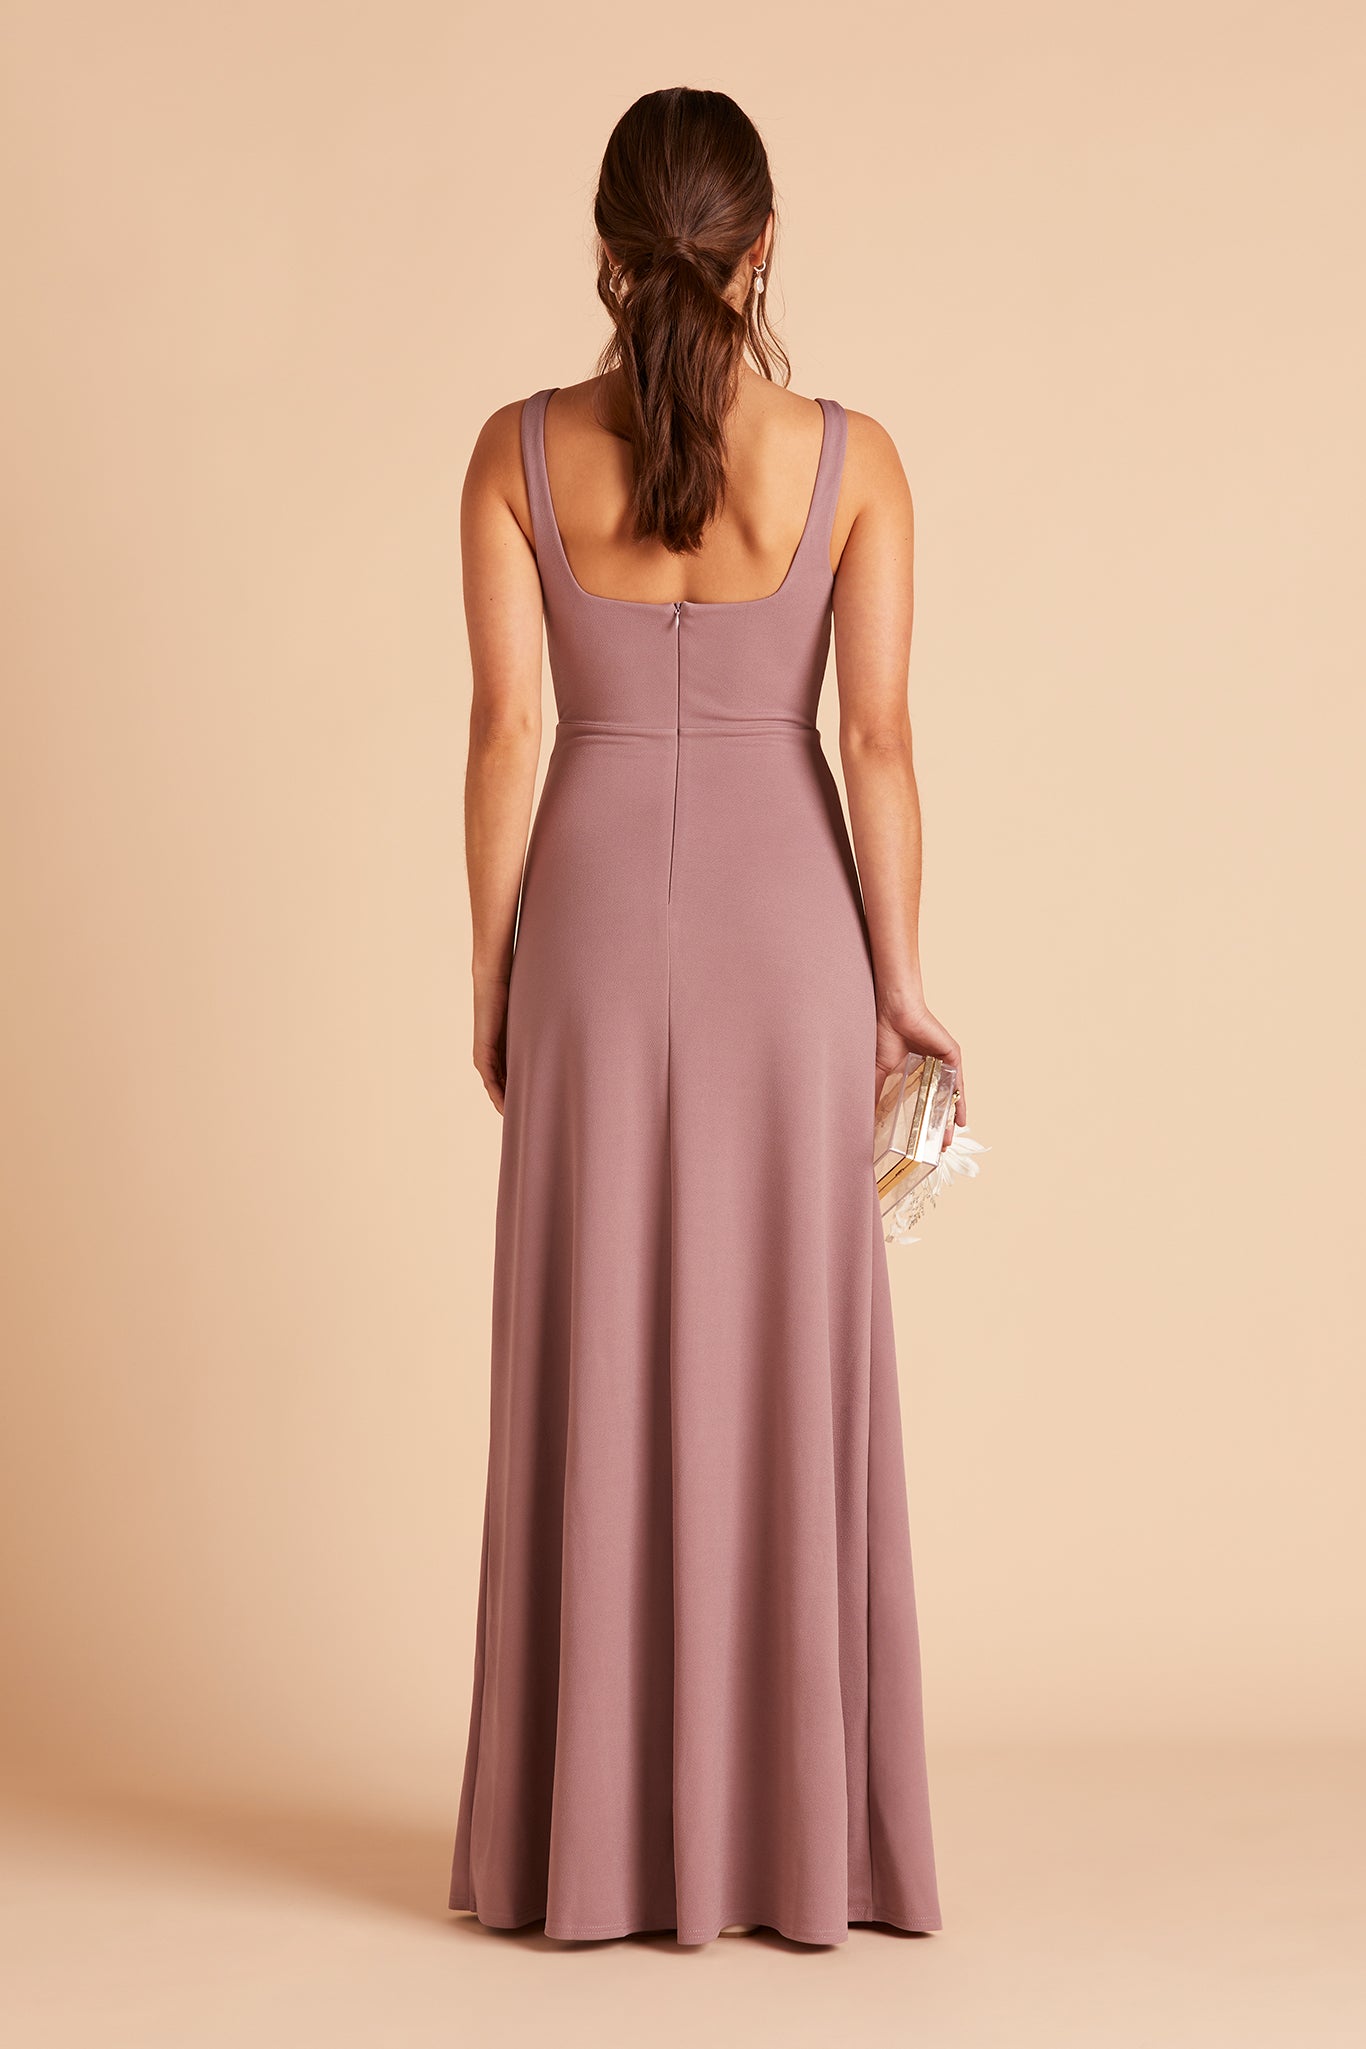 Alex convertible bridesmaid dress with slit in dark mauve crepe by Birdy Grey, back view